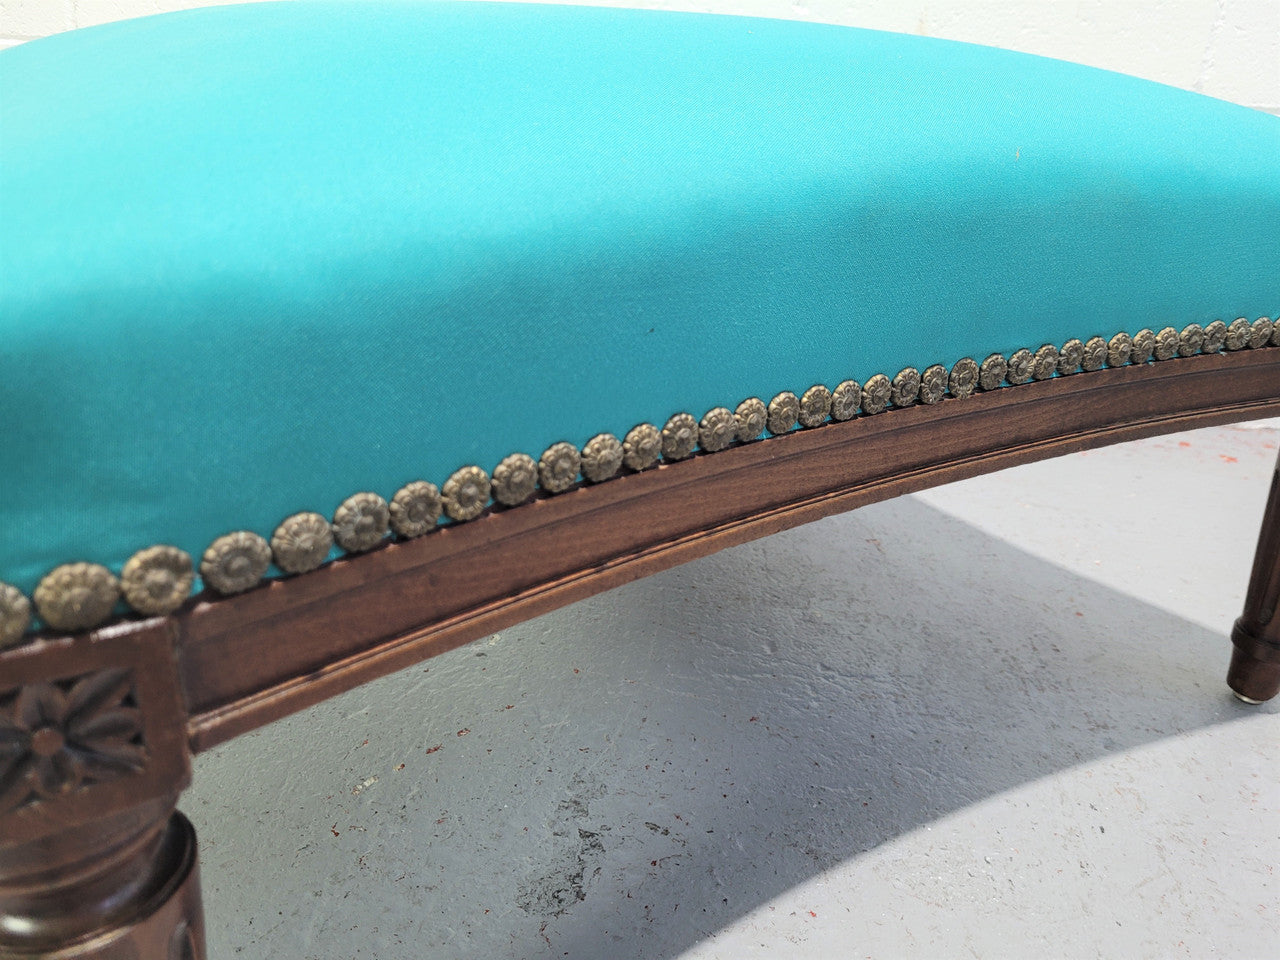 Louis XVI style Walnut blue upholstered large square foot stool. In good original condition.